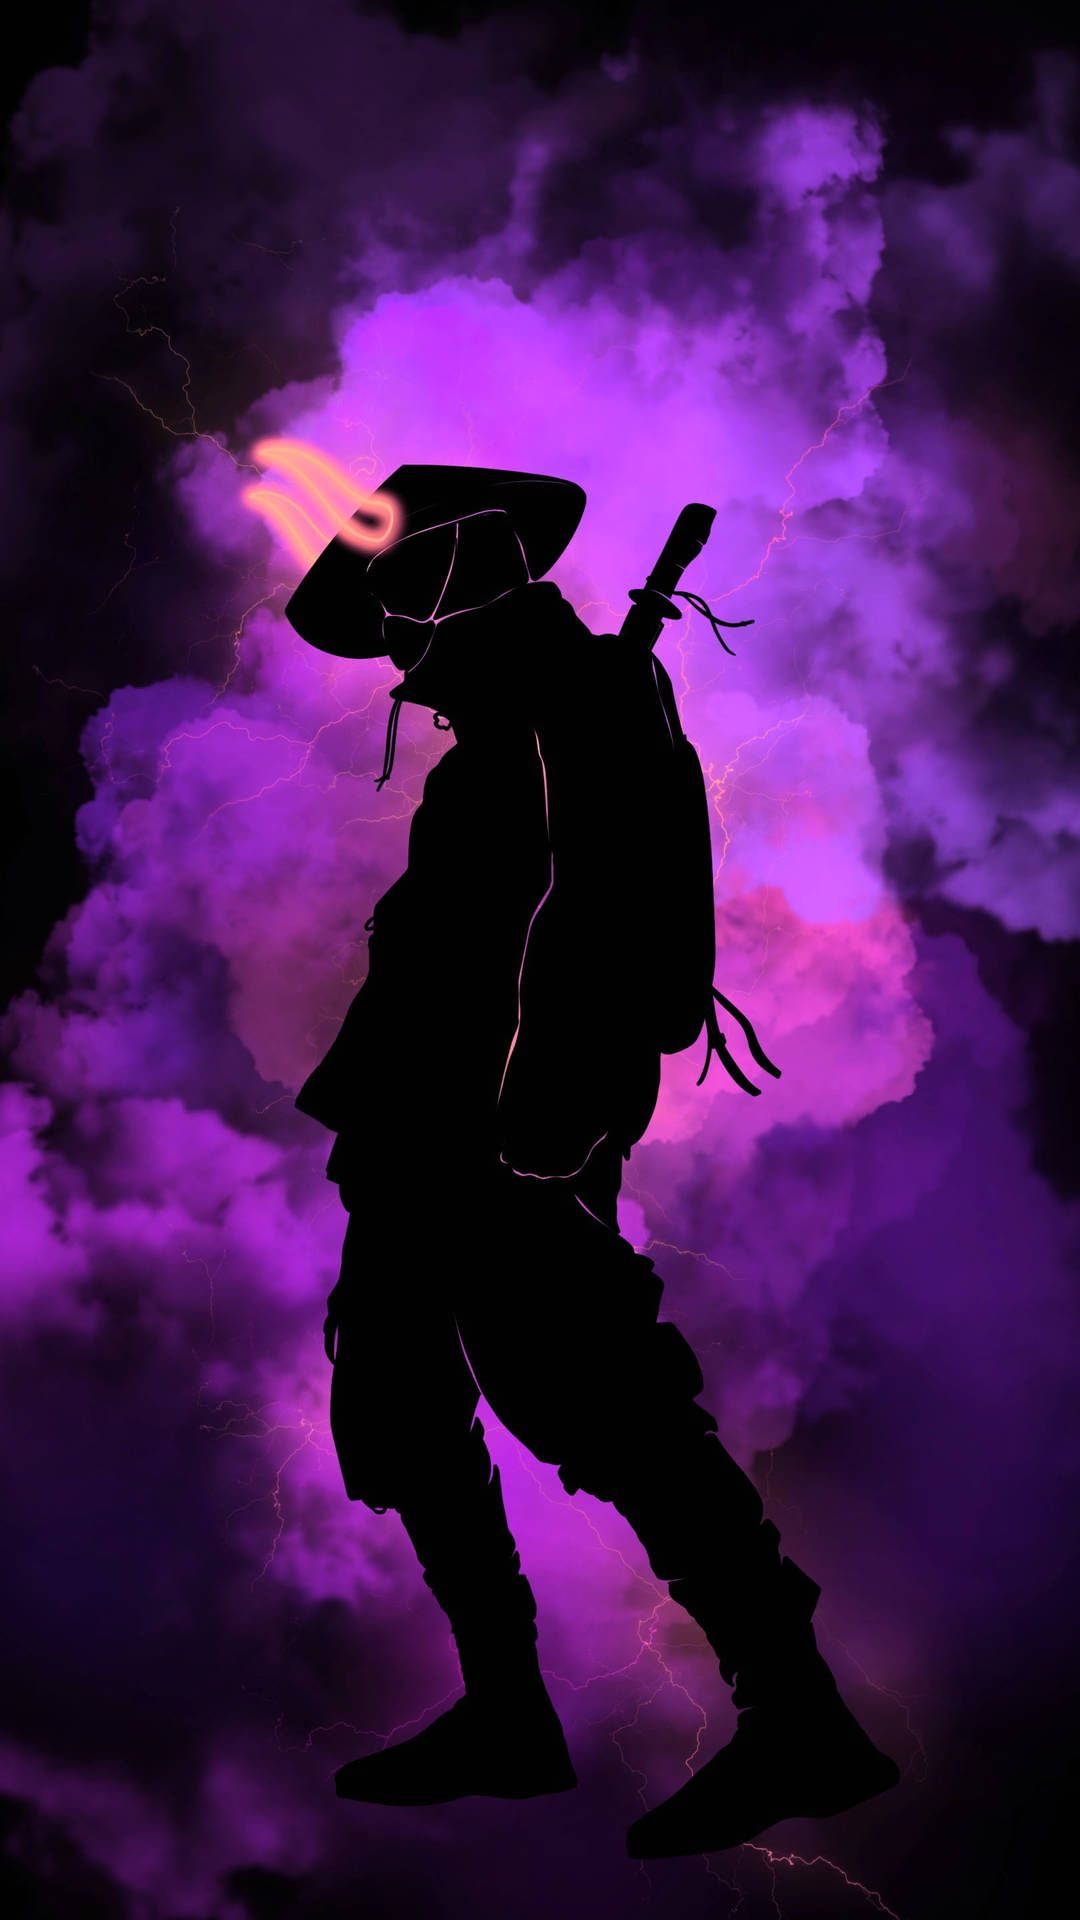 Fortnite Mobile Wallpaper iPhone with high-resolution 1080x1920 pixel. You can use this wallpaper for your iPhone 5, 6, 7, 8, X, XS, XR backgrounds, Mobile Screensaver, or iPad Lock Screen - Samurai